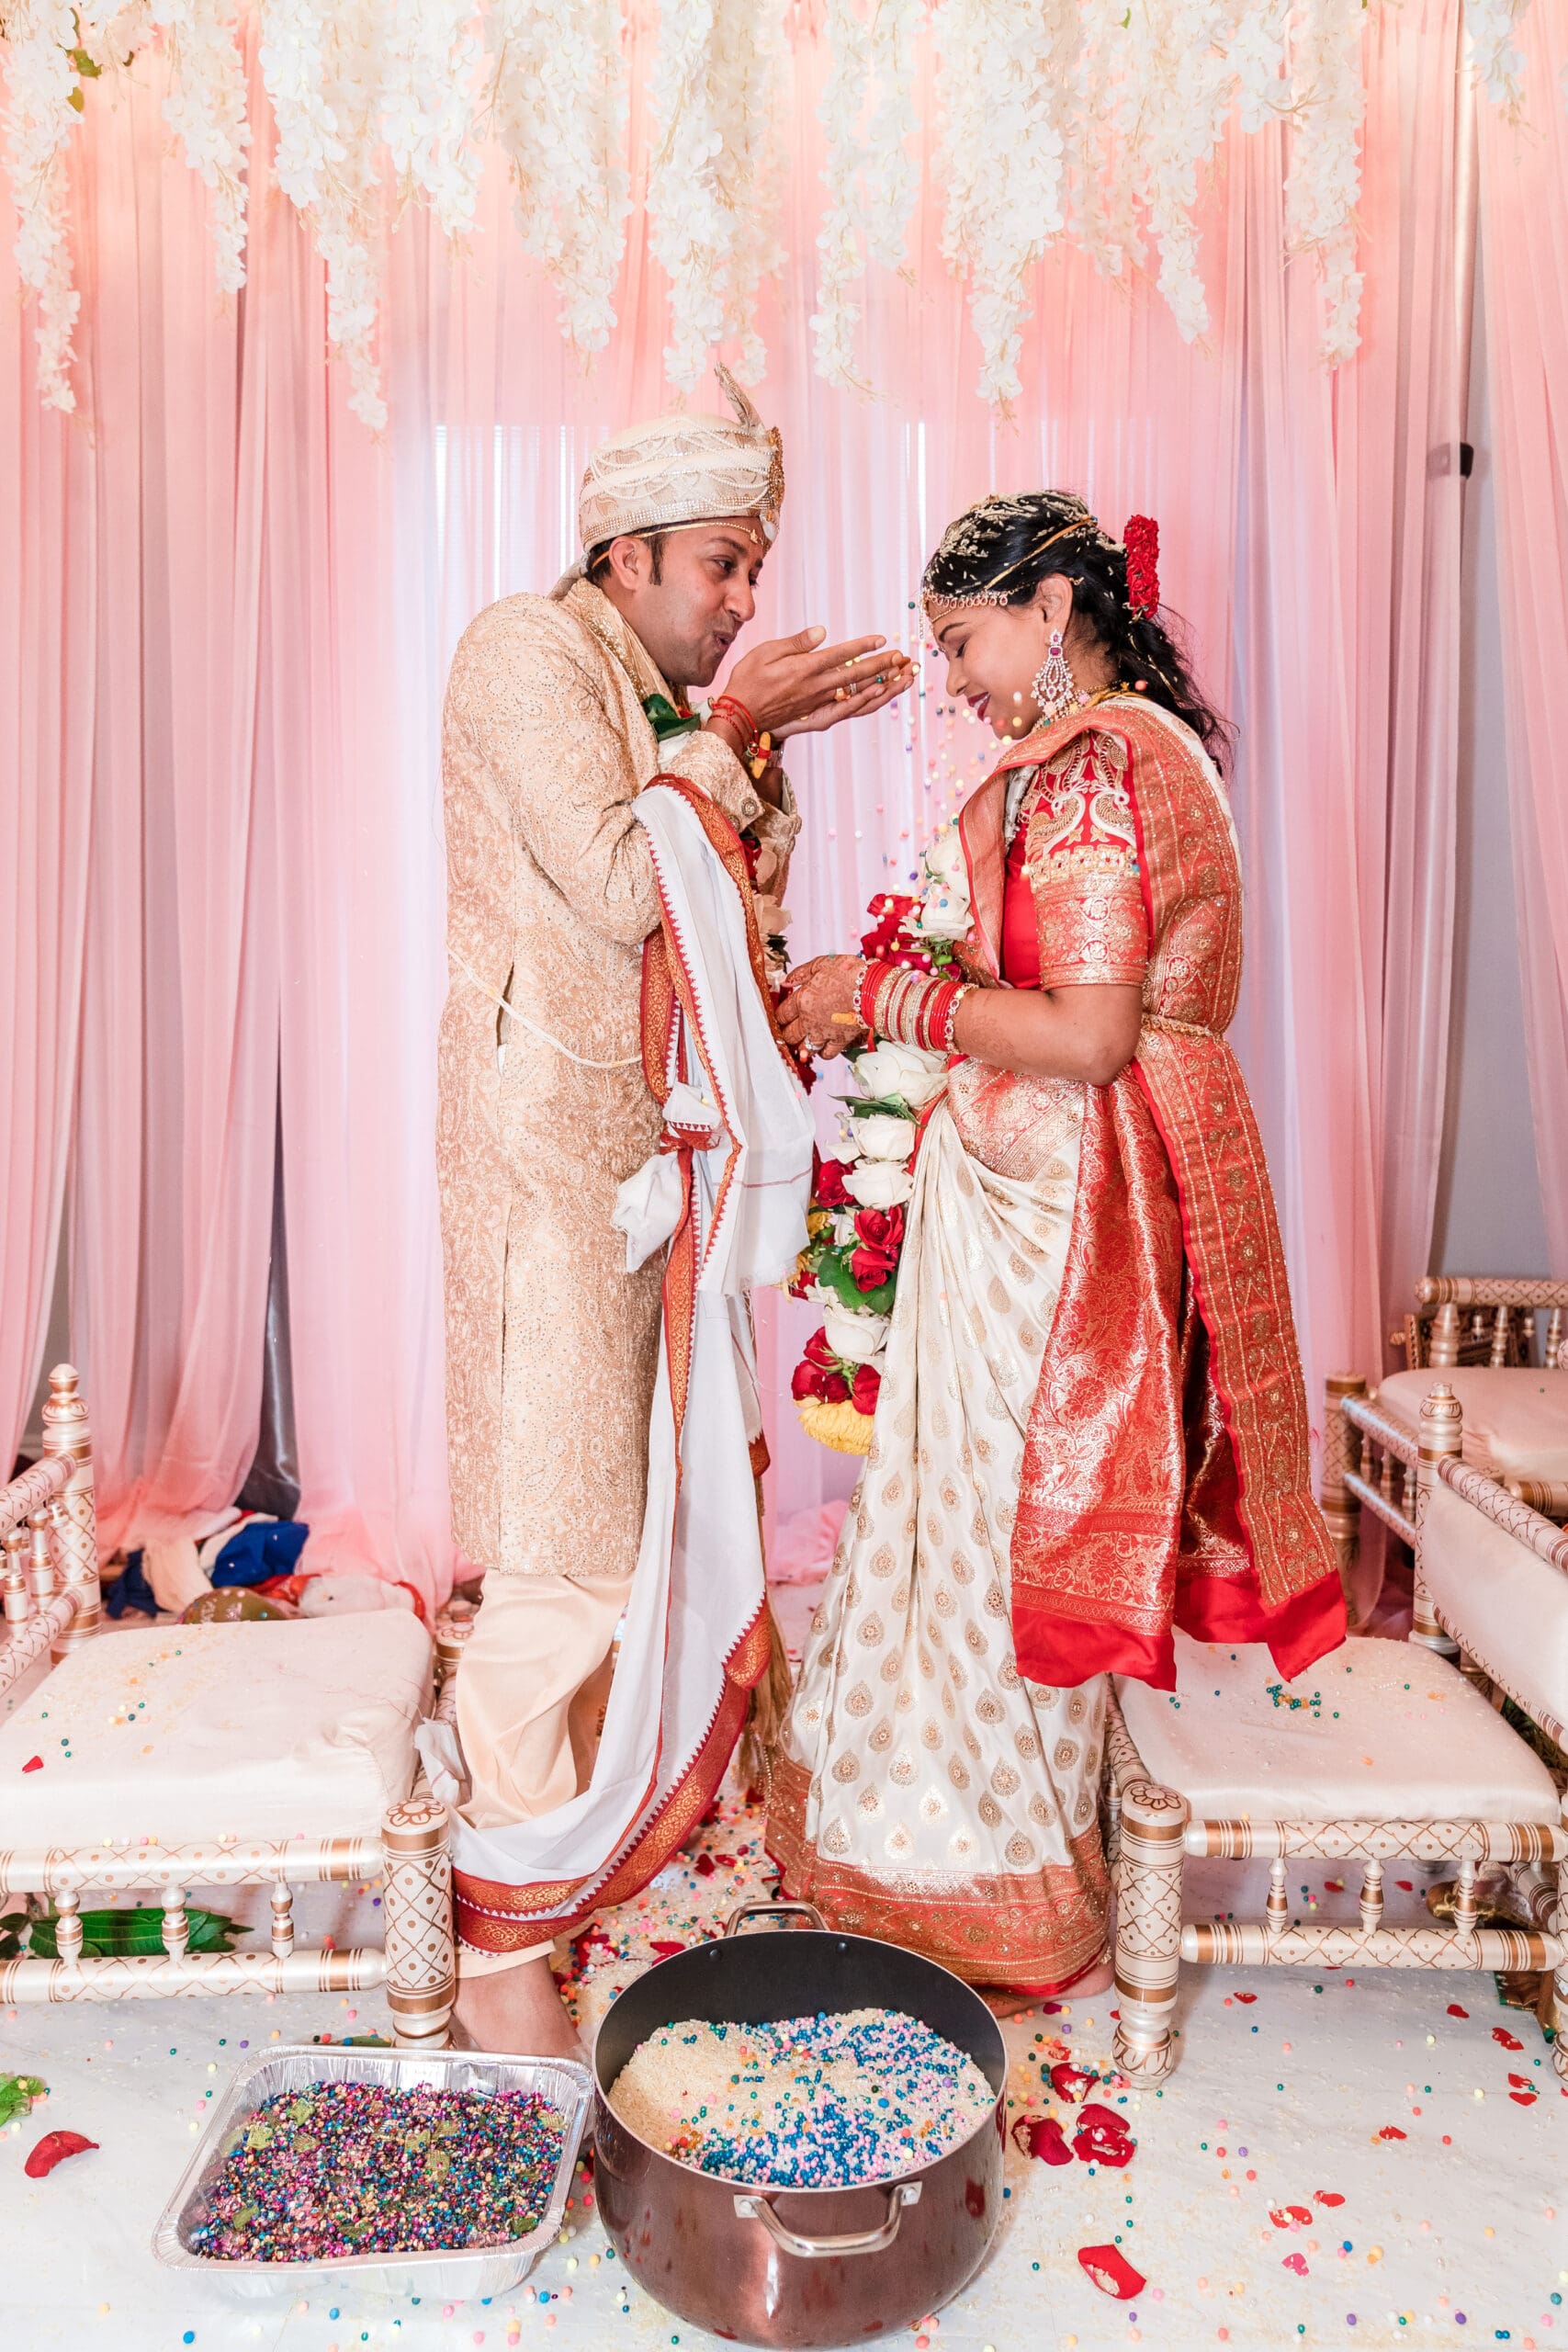 Couple adorned in traditional attire surrounded by cultural decorations - cultural wedding photography